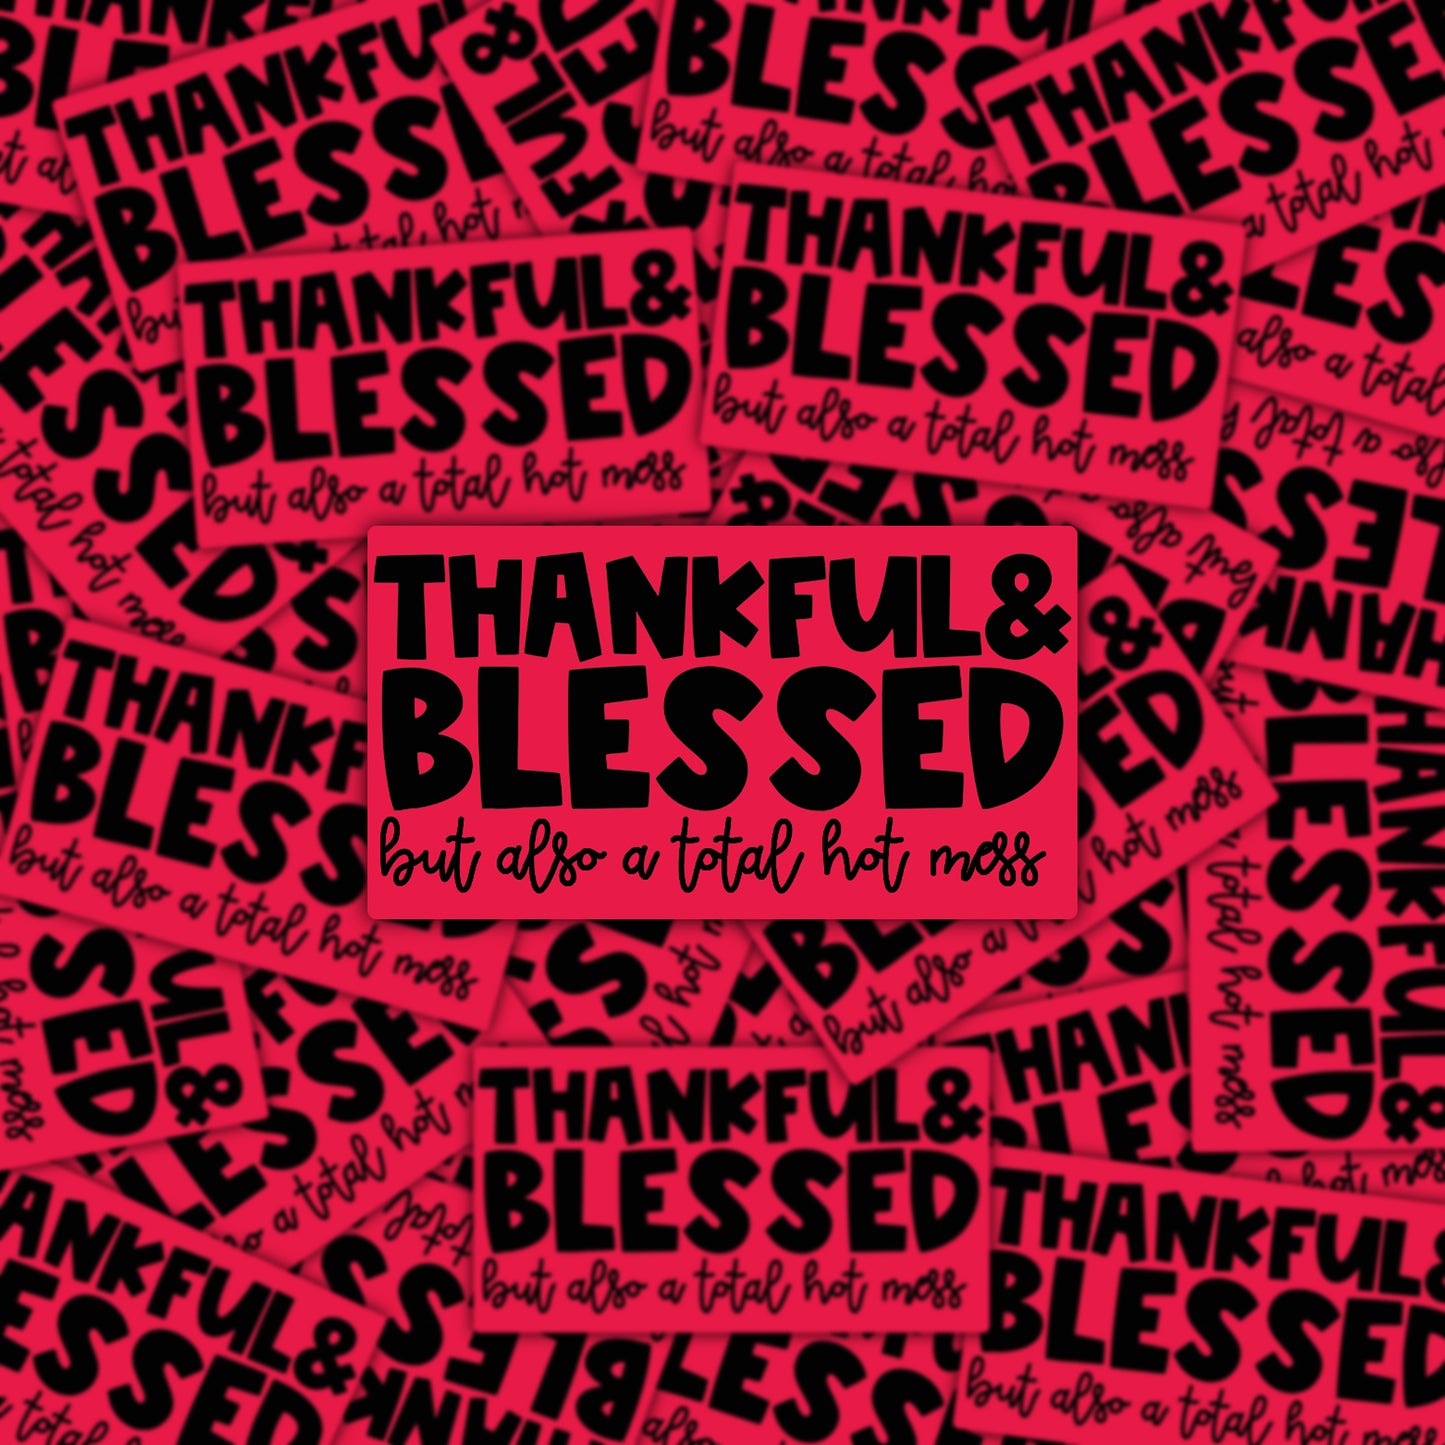 #7007 - PACKAGING STICKERS - ROLLS - THANKFUL & BLESSED BUT ALSO A TOTAL HOT MESS